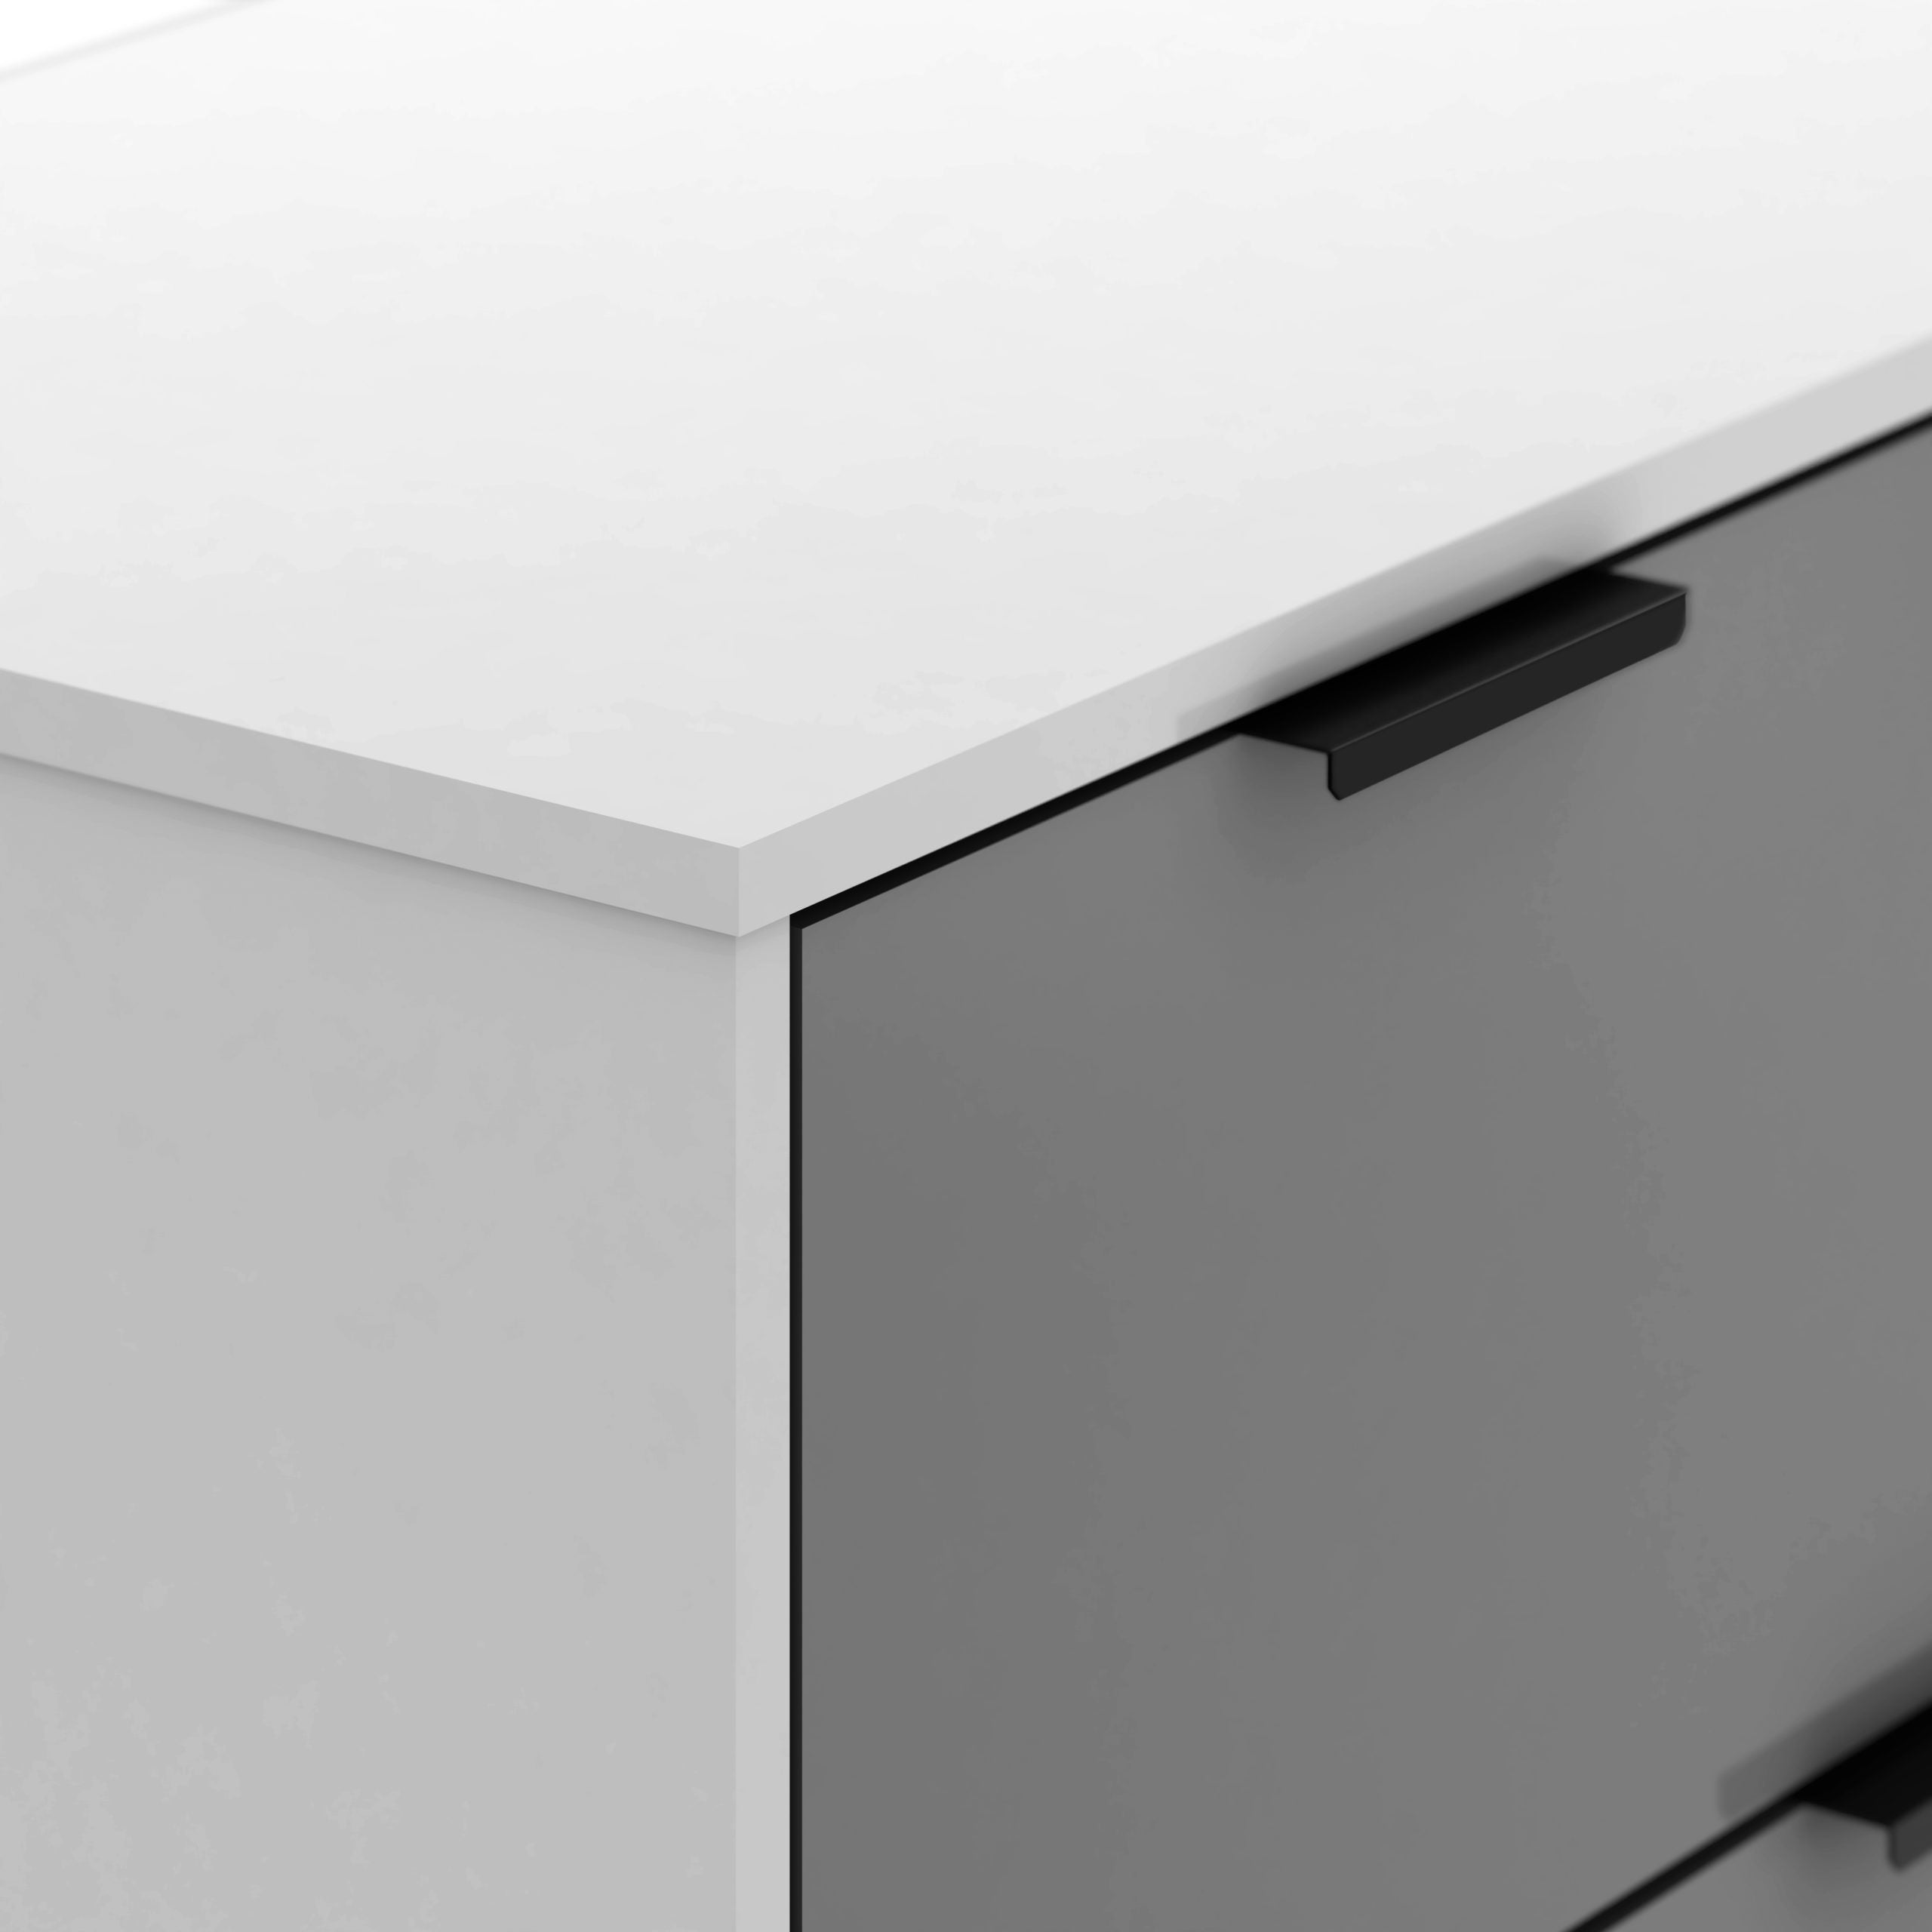 Madrid 3 and 2 Drawer Chest of Drawers in Grey and White Gloss Finish